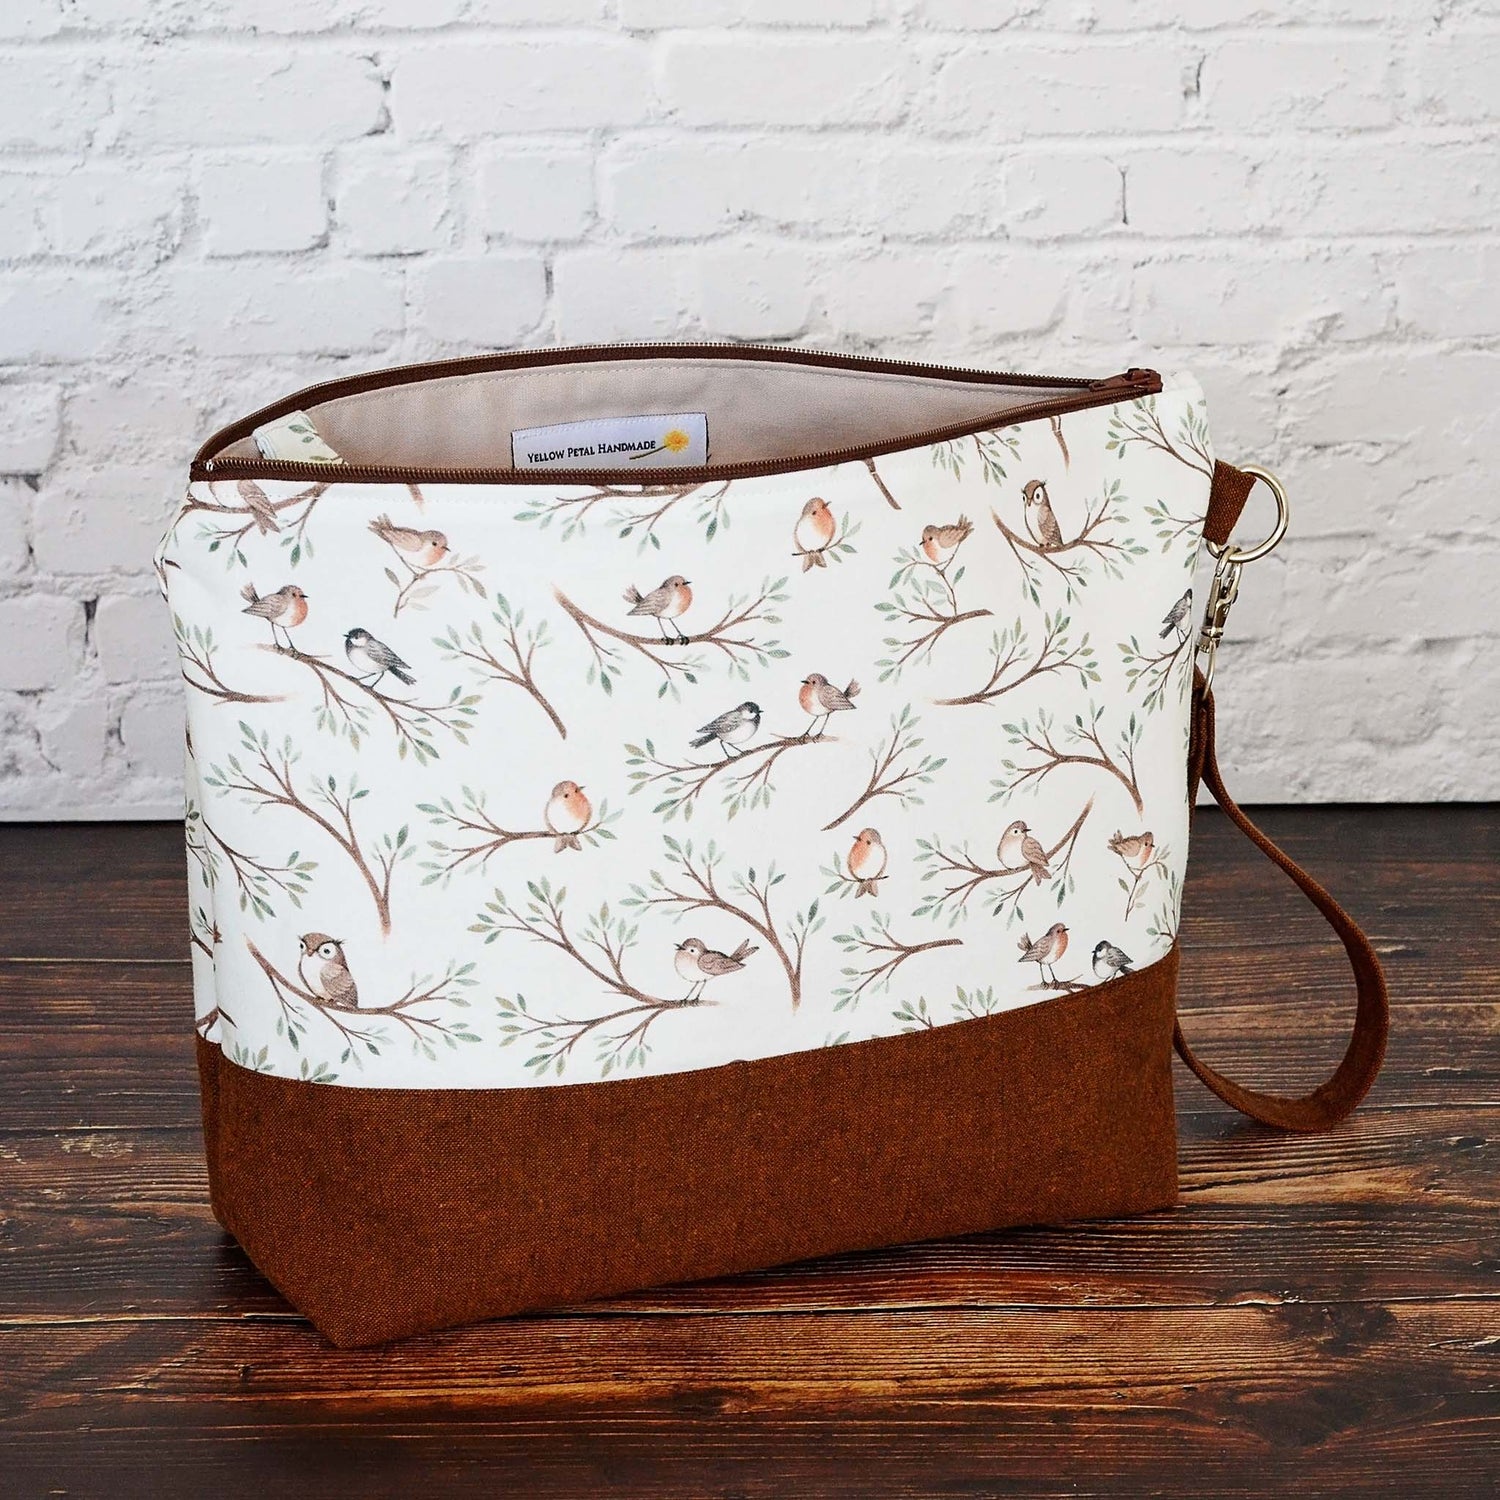 Bird and Owl themed project bag with zipper and wrist strap.  Made in Canada by Yellow Petal Handmade.